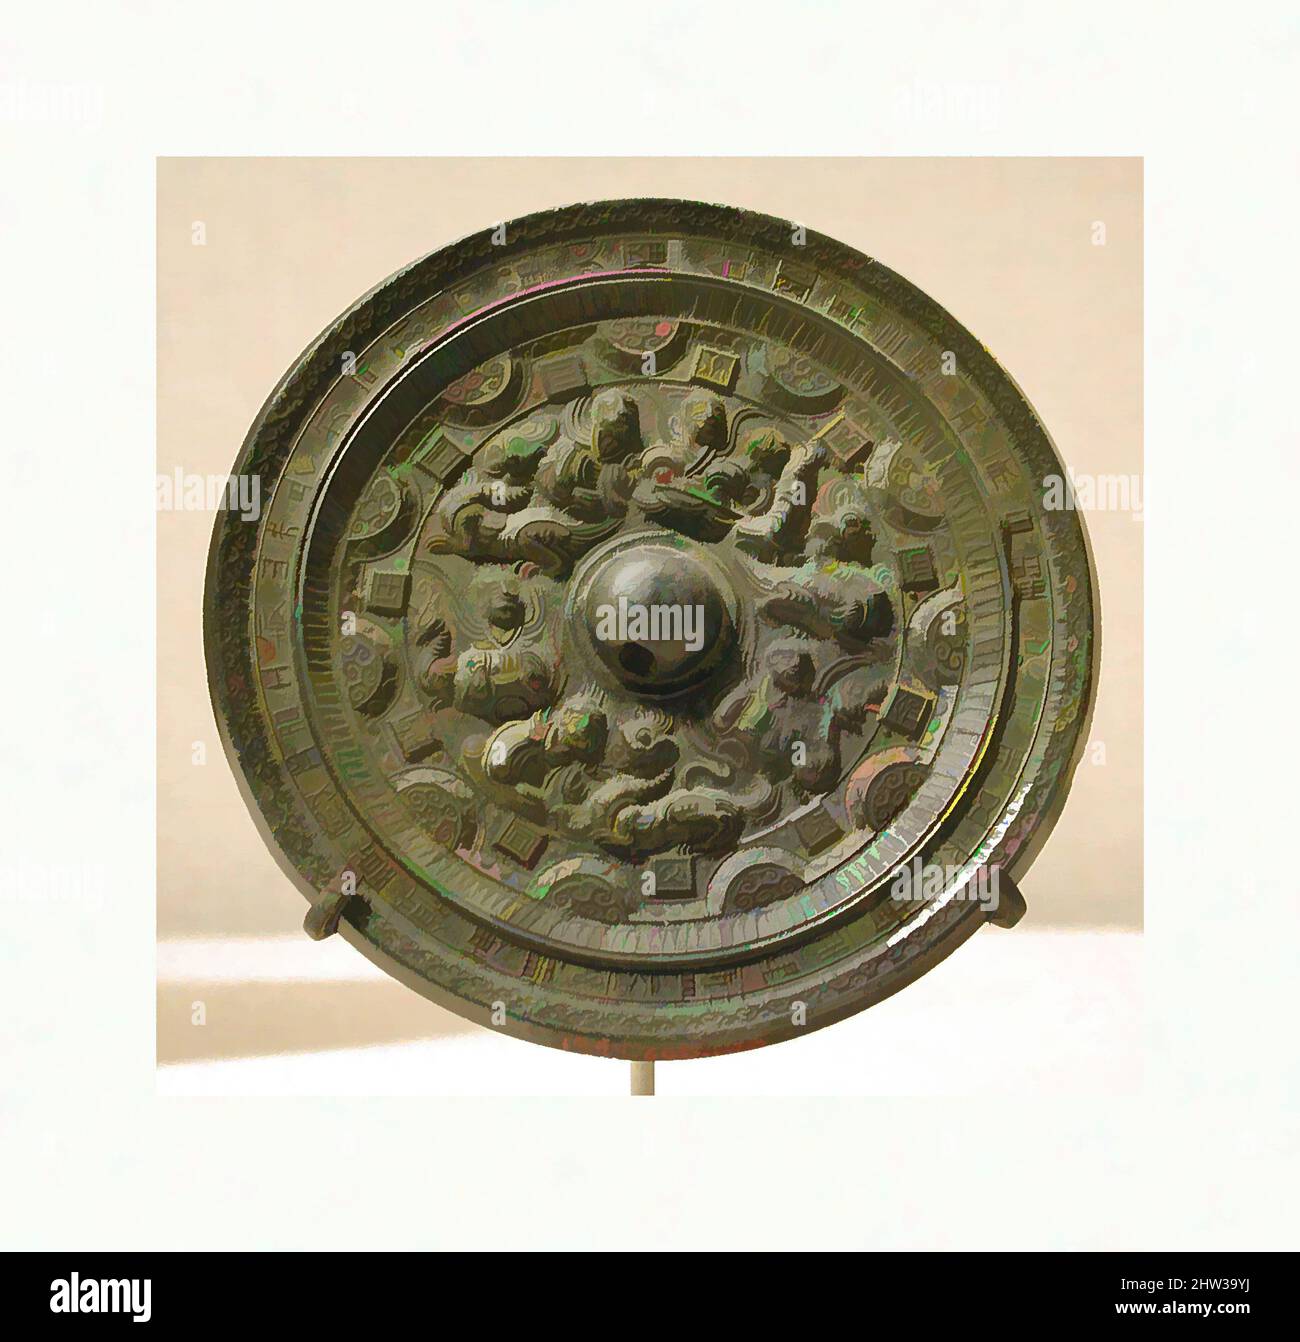 Art inspired by 東漢 仙人神獸紋青銅畫像鏡, Mirror with Supernatural Beings and Animals, Eastern Han dynasty (25–220), late 2nd century, China, Bronze, Diam. 4 1/4 in. (10.8 cm), Mirrors, Classic works modernized by Artotop with a splash of modernity. Shapes, color and value, eye-catching visual impact on art. Emotions through freedom of artworks in a contemporary way. A timeless message pursuing a wildly creative new direction. Artists turning to the digital medium and creating the Artotop NFT Stock Photo